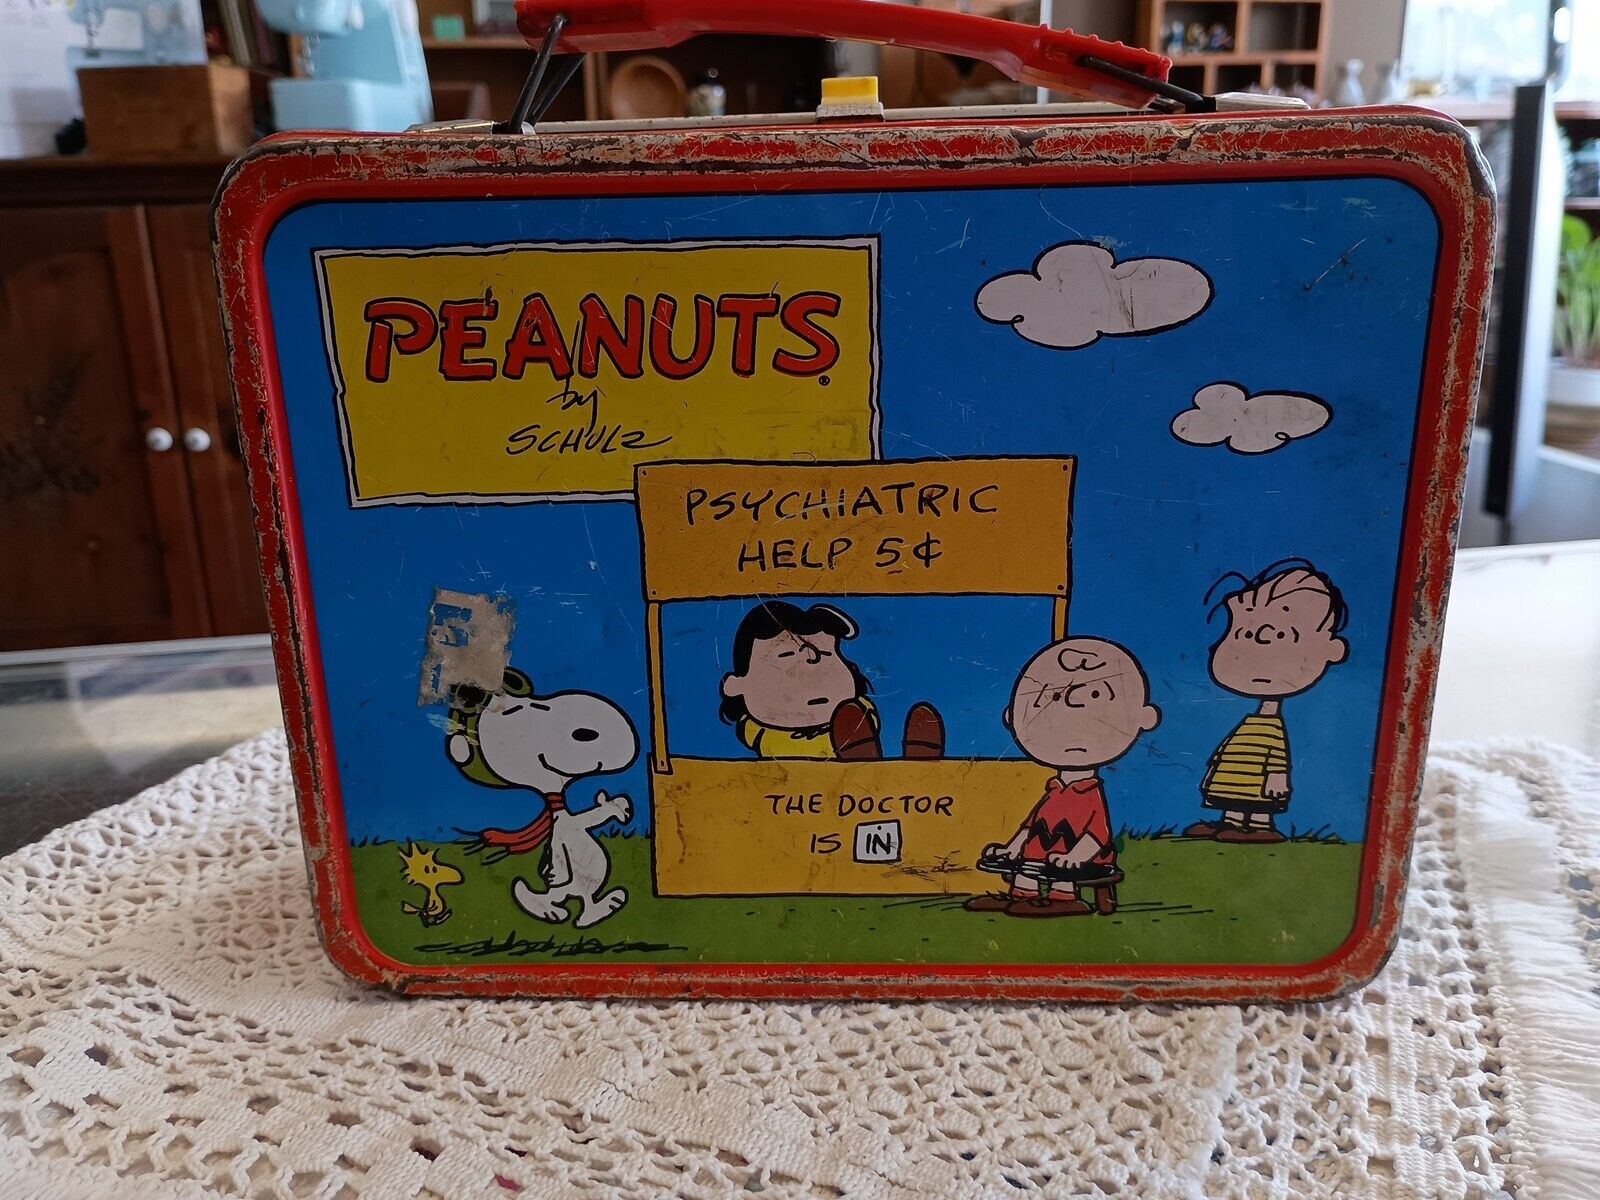 Peanuts Lunch Box Schulz 1973 Charlie Brown Snoopy Psychiatric Help No Thermos